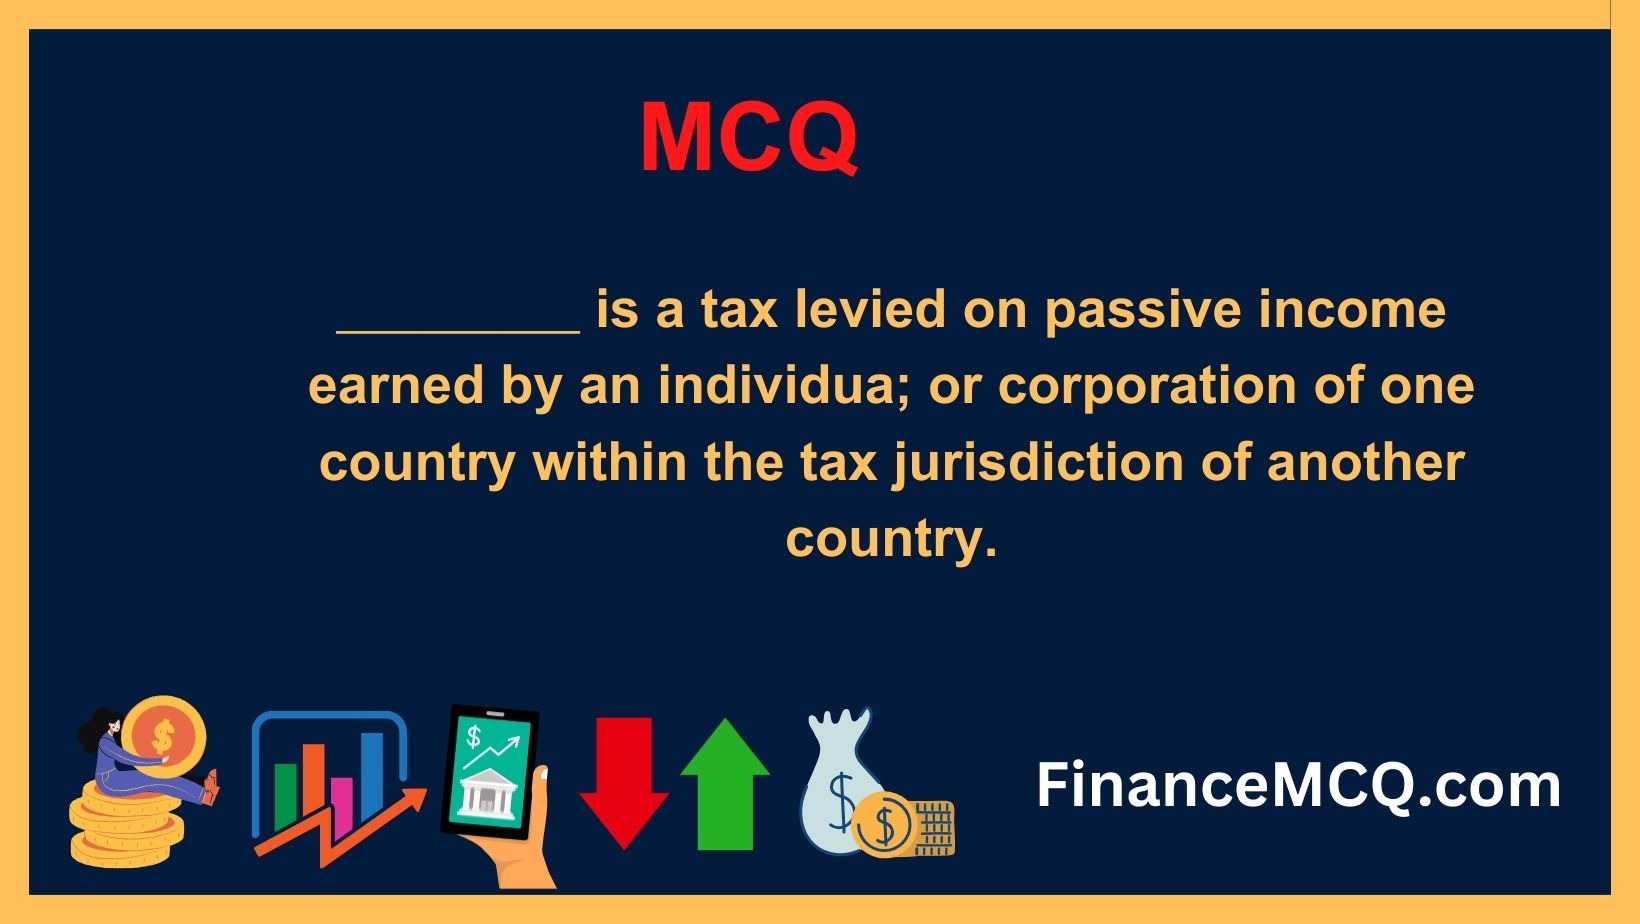 _________ is a tax levied on passive income earned by an individua; or corporation of one country within the tax jurisdiction of another country.